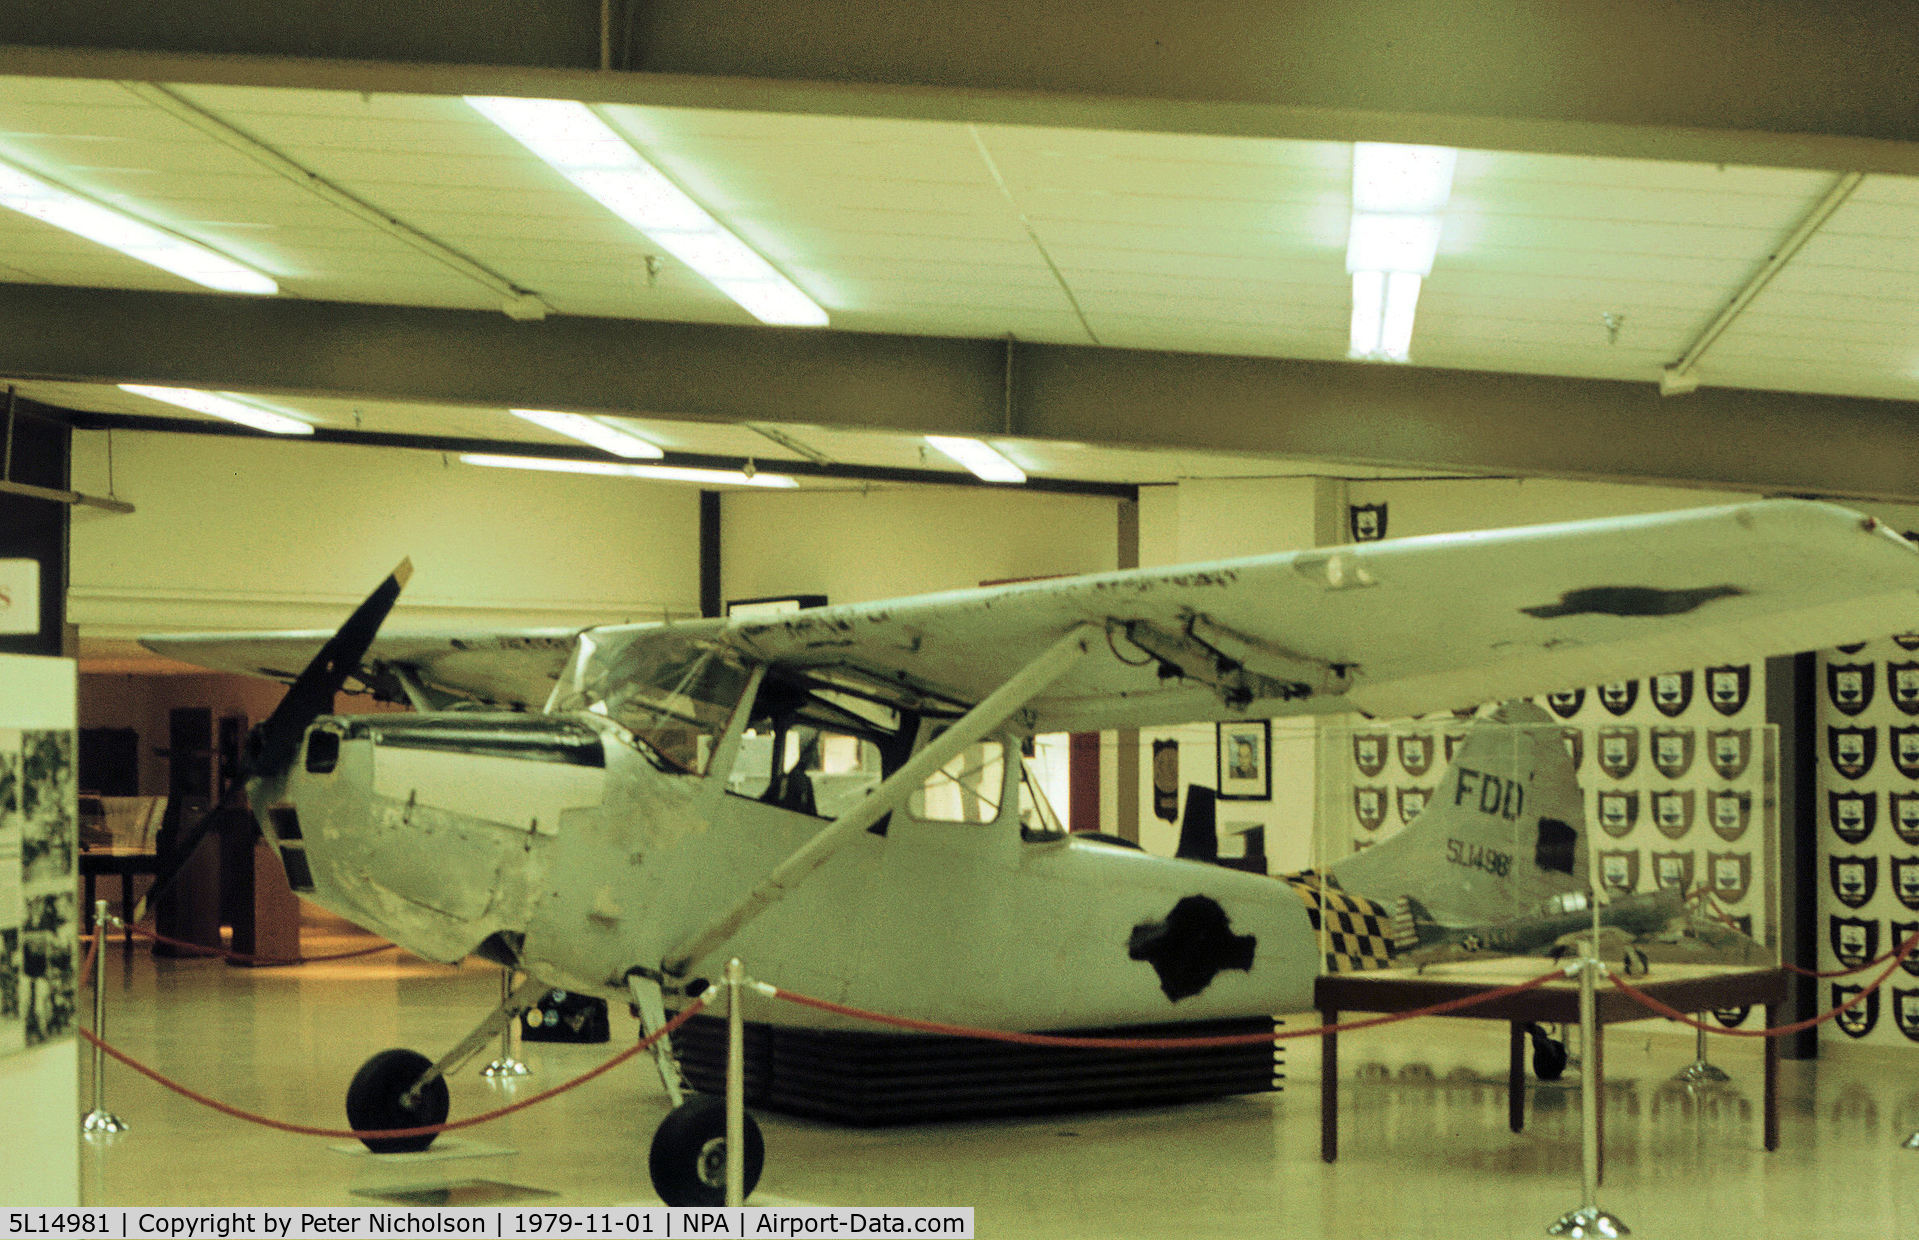 5L14981, 1950 Cessna O-1A Bird Dog C/N 21866, O-1A Bird Dog 51-4981 displayed as South Vietnam Air Force 5L-14981 at the Pensacola Naval Aviation Museum in November 1979.